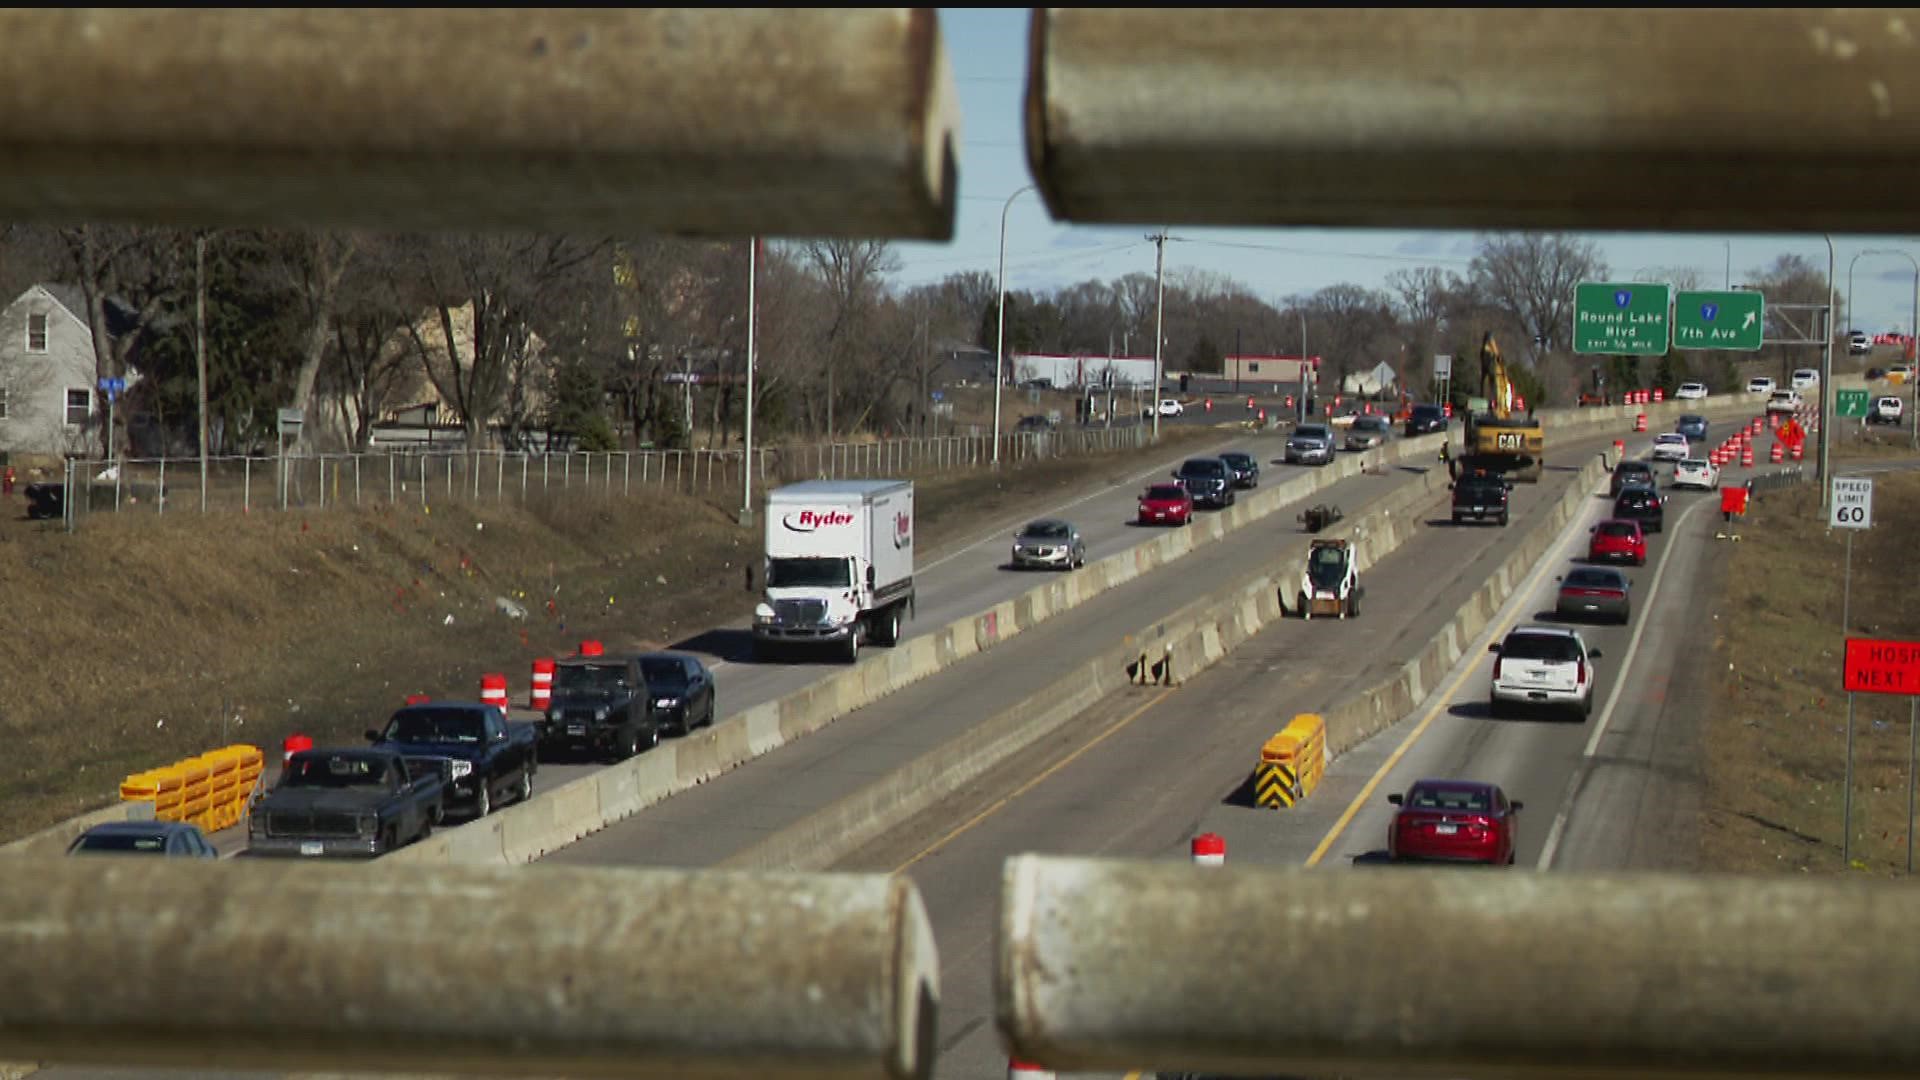 Once the project is done, businesses look forward to a less congested, smoother highway.